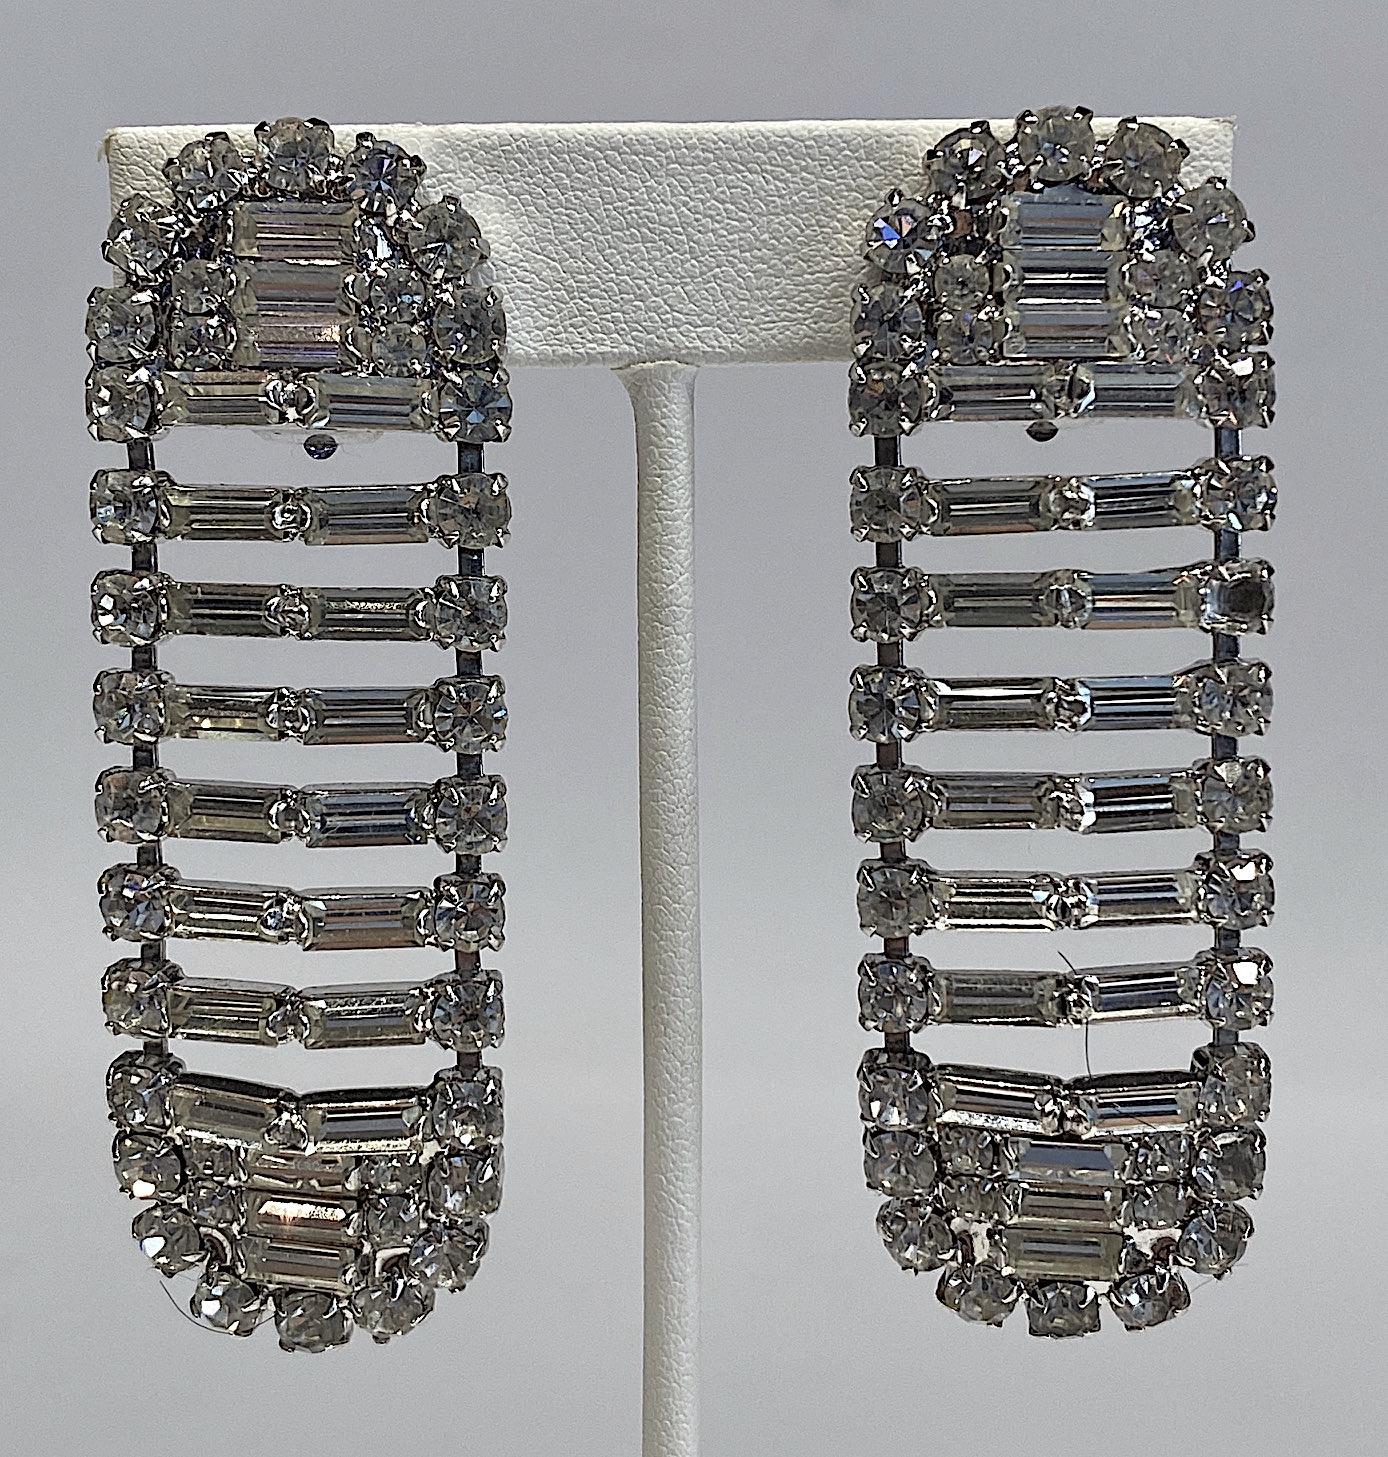 A sparkles and noticeable pair of Italian round and baguette rhinestone earrings from the 1980s. The earrings are large yet constructed with open spaces to keep them light and delicate in appearance. The metal is rhodium plated. Each earring has a